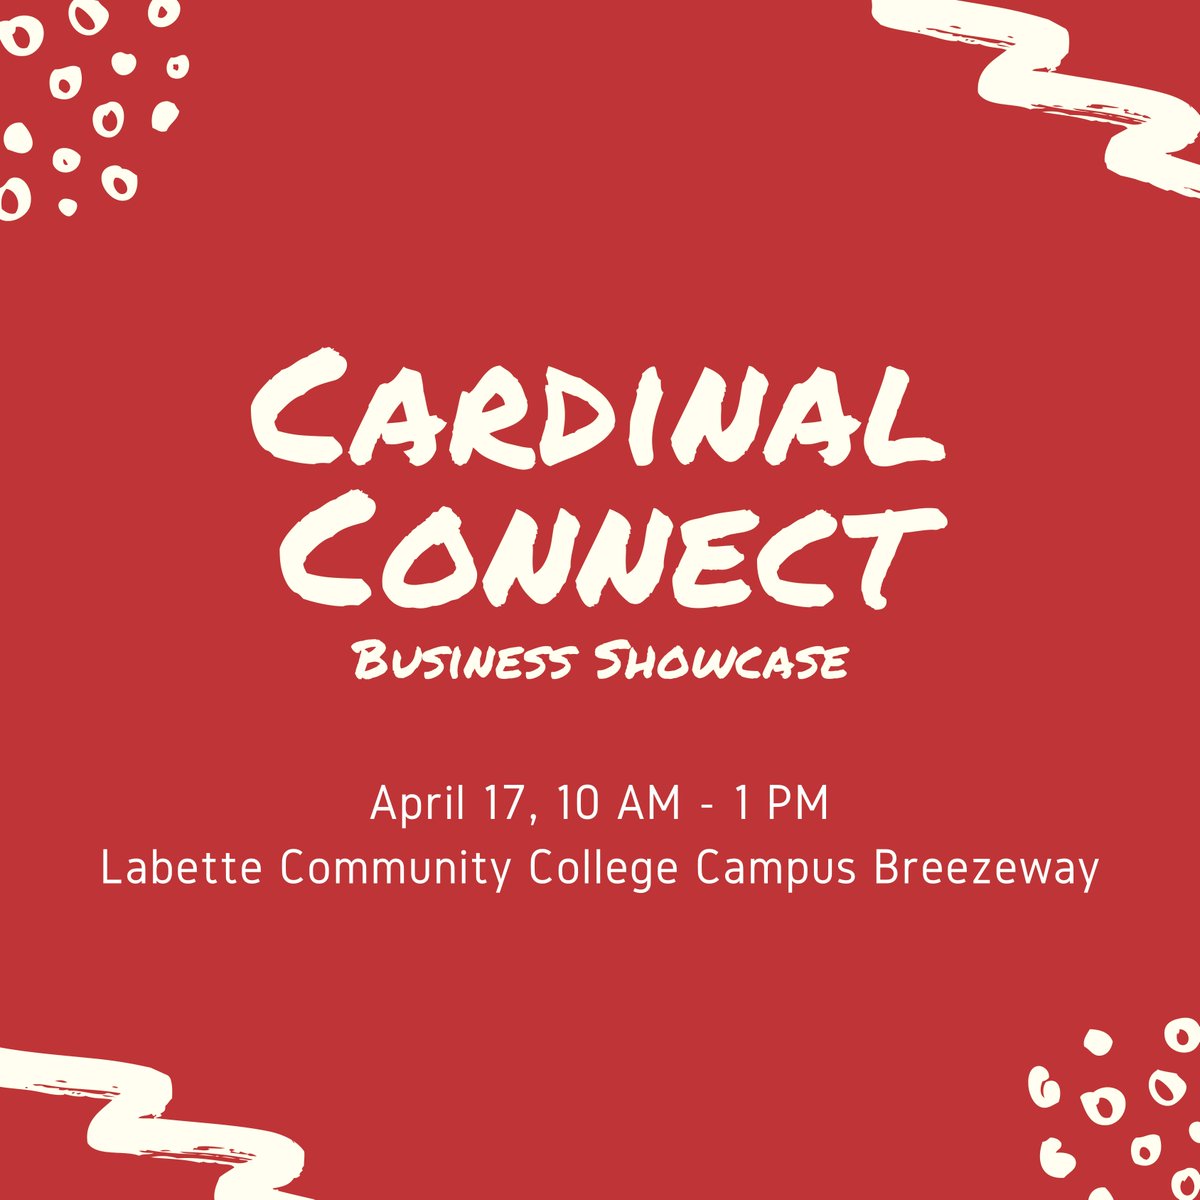 Tank Connection representatives will join other area businesses at Labette Community College to showcase our business. The Cardinal Connect Business Showcase will be on April 17, from 10 am - 1 pm in the LCC Breezeway. #CareerFair